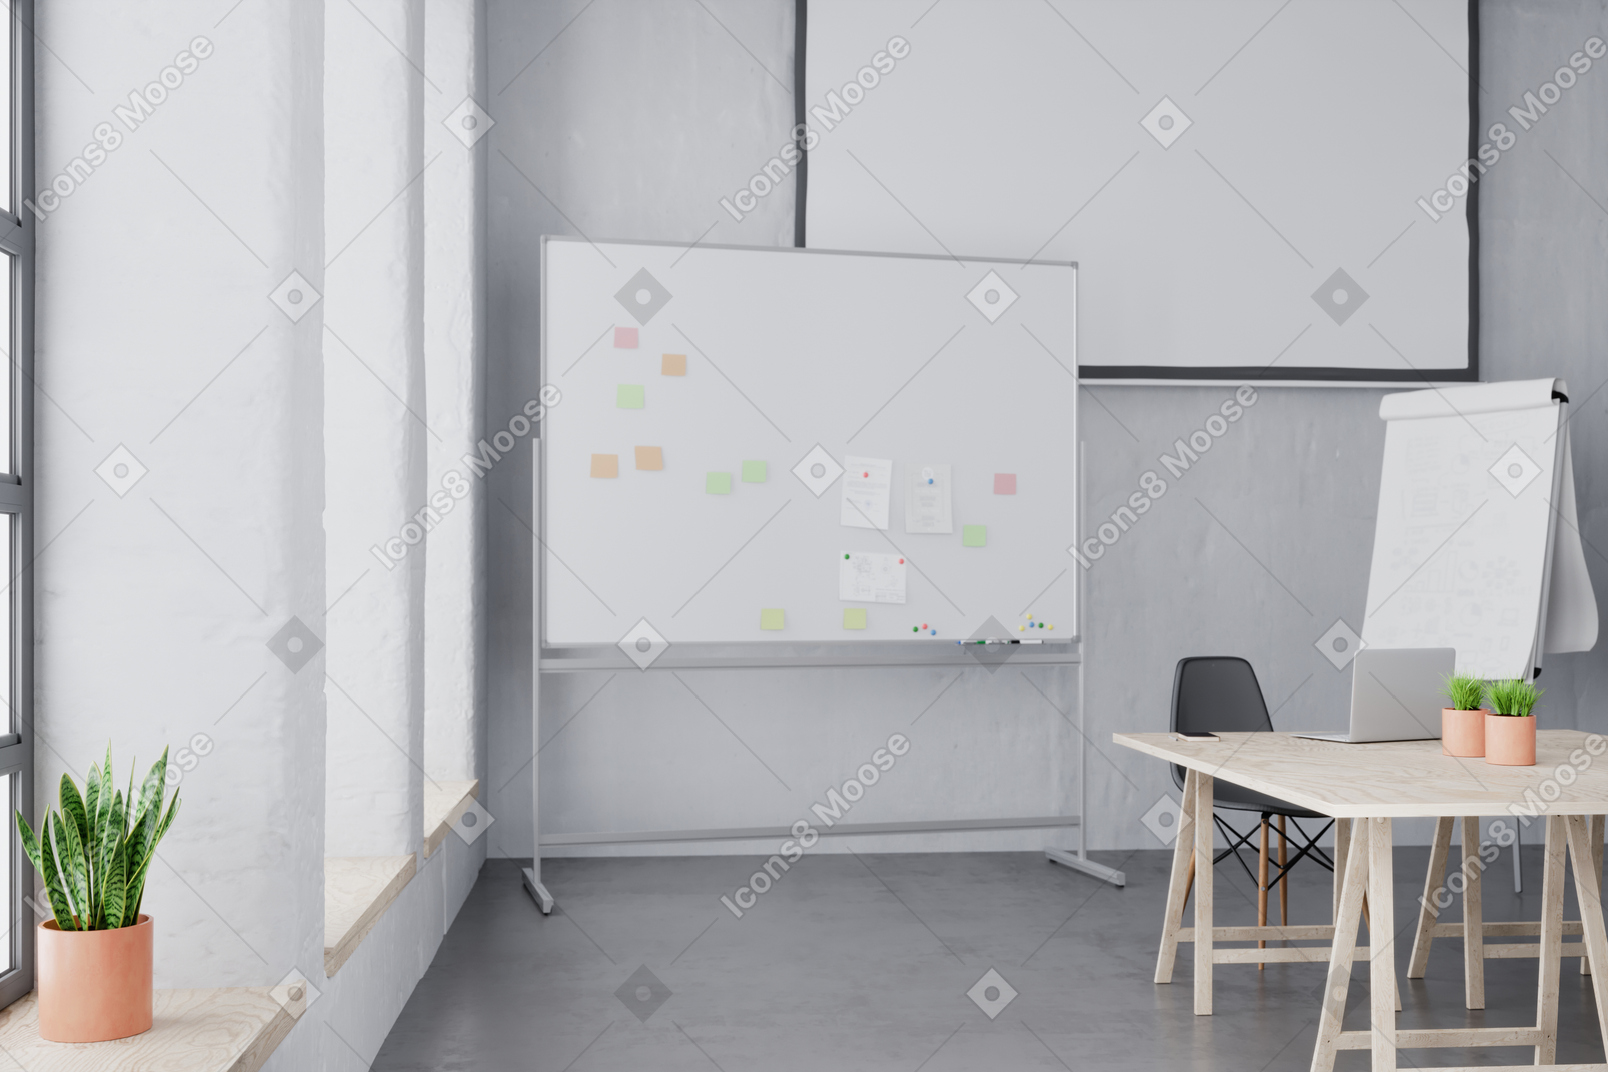 Classroom with whiteboard and projection screen